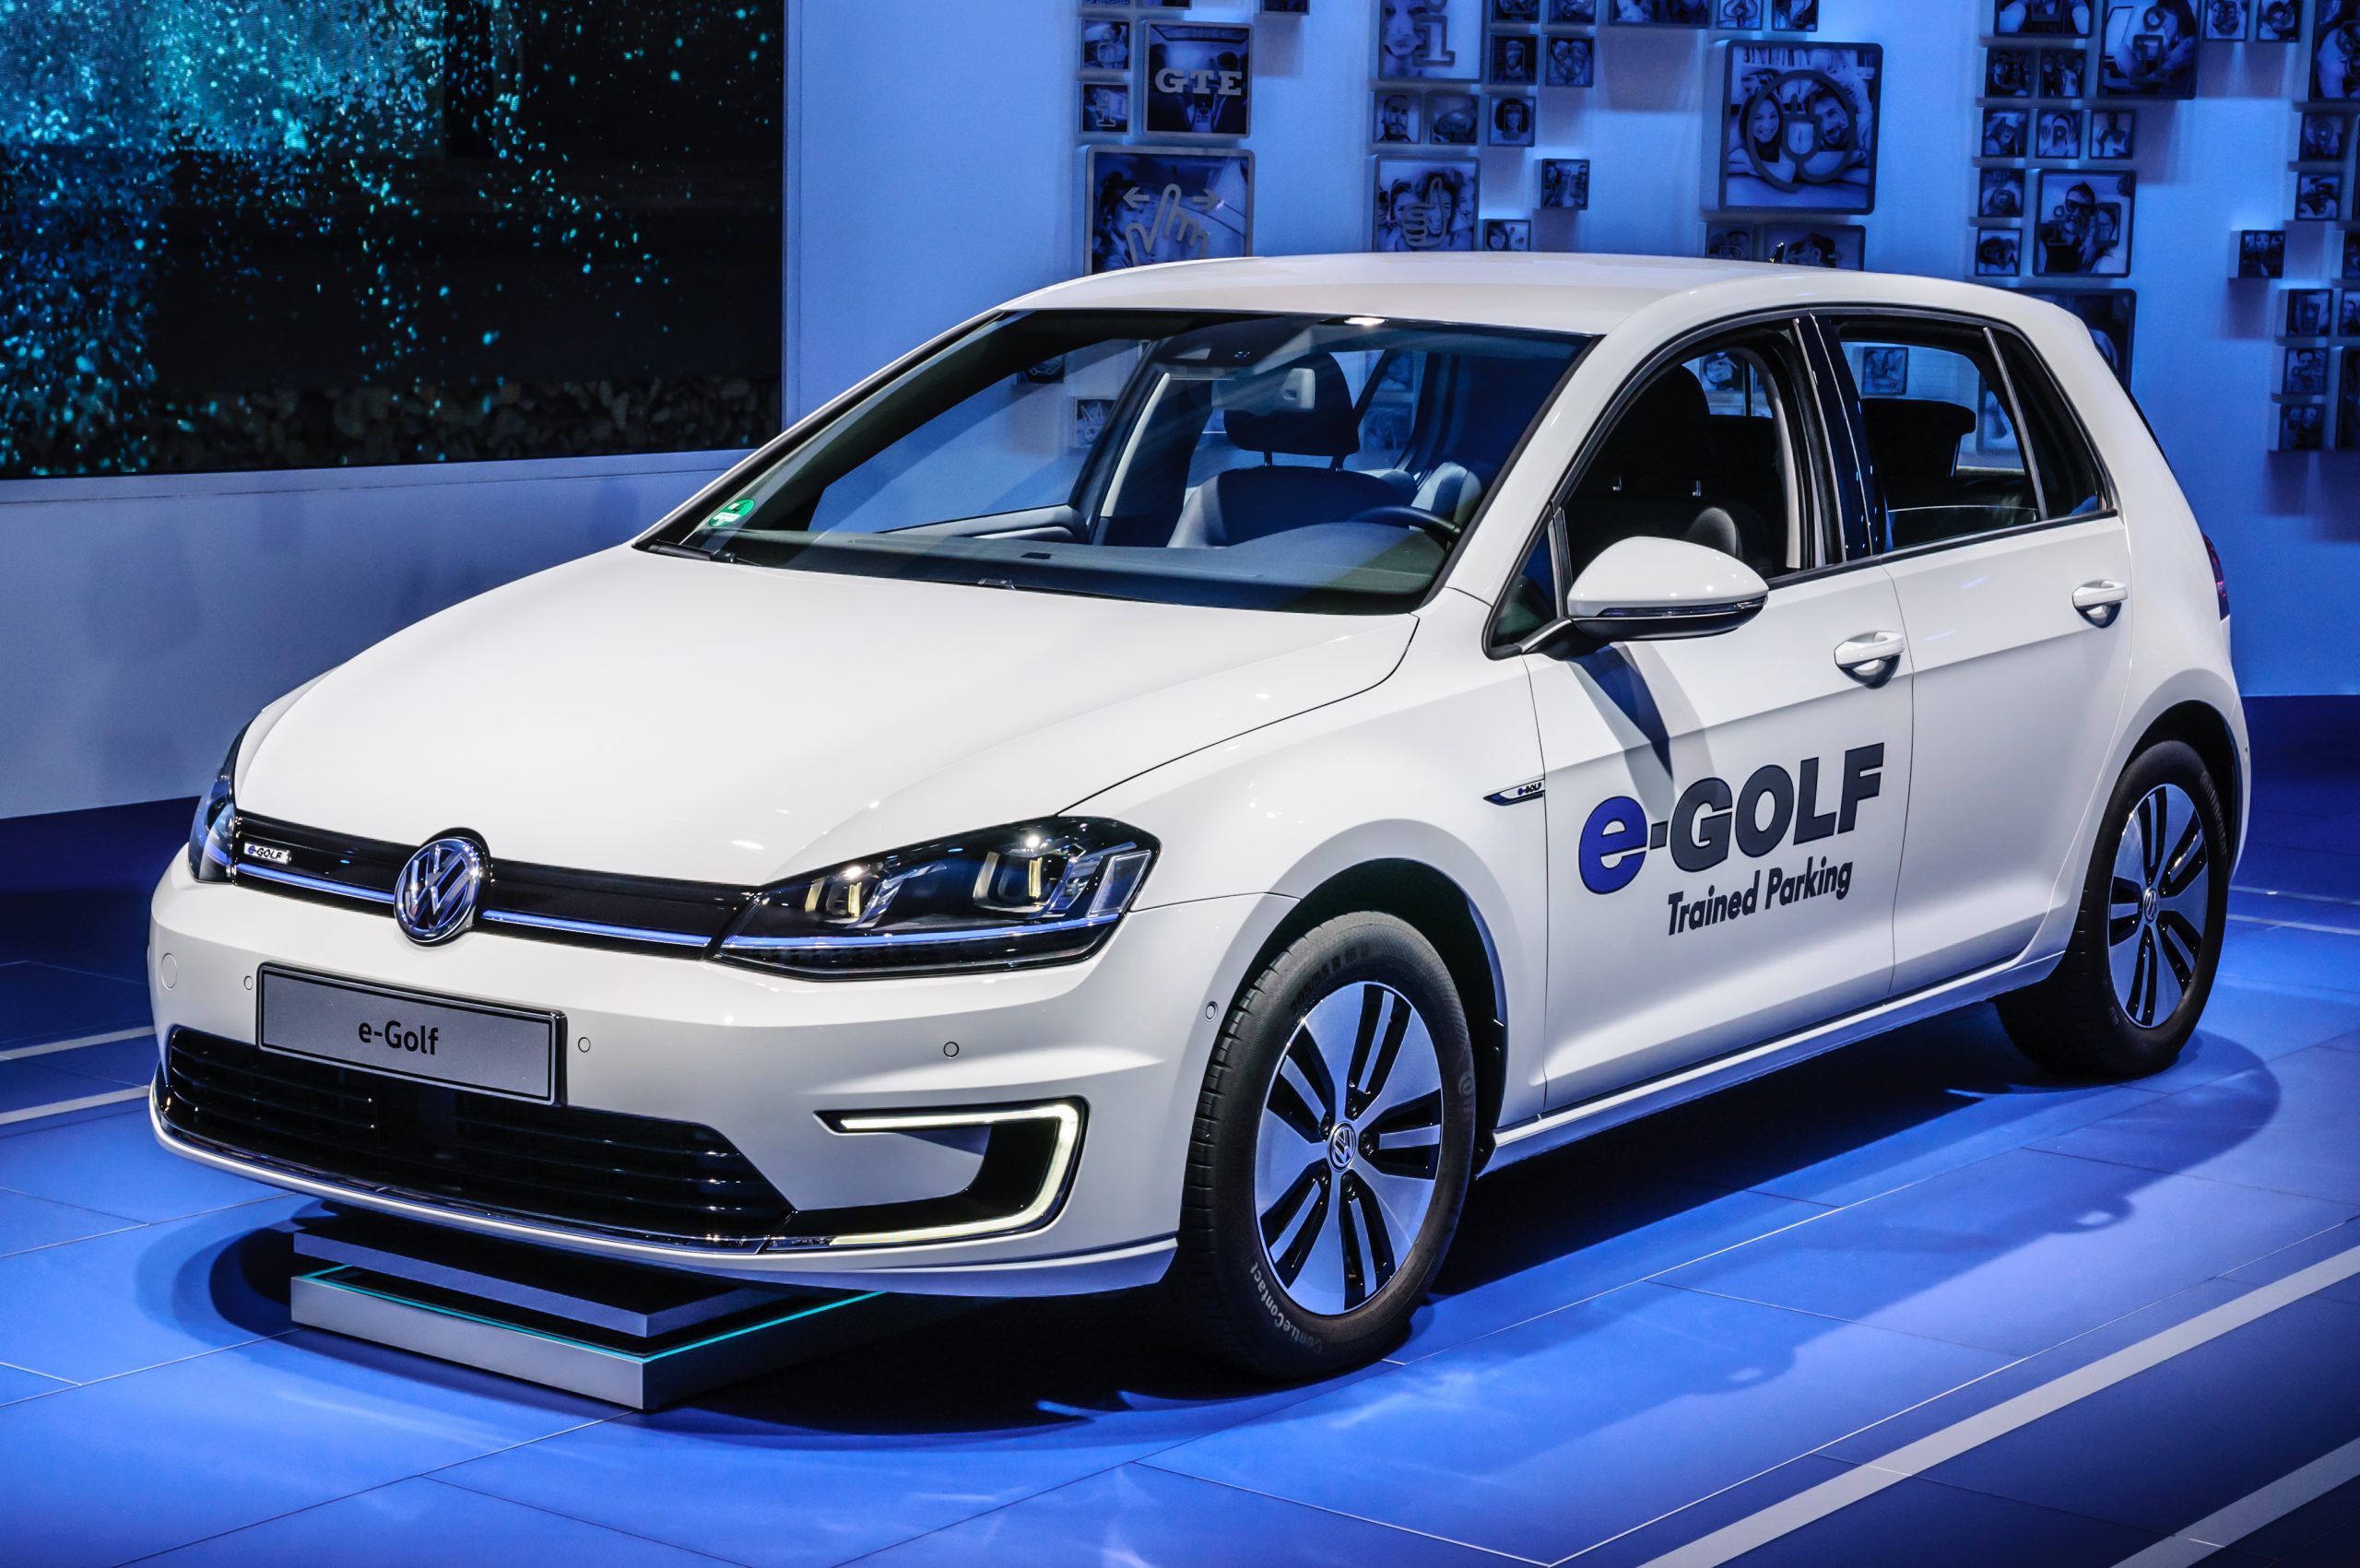 While Volkswagen e-Golf in a blue lighted showroom